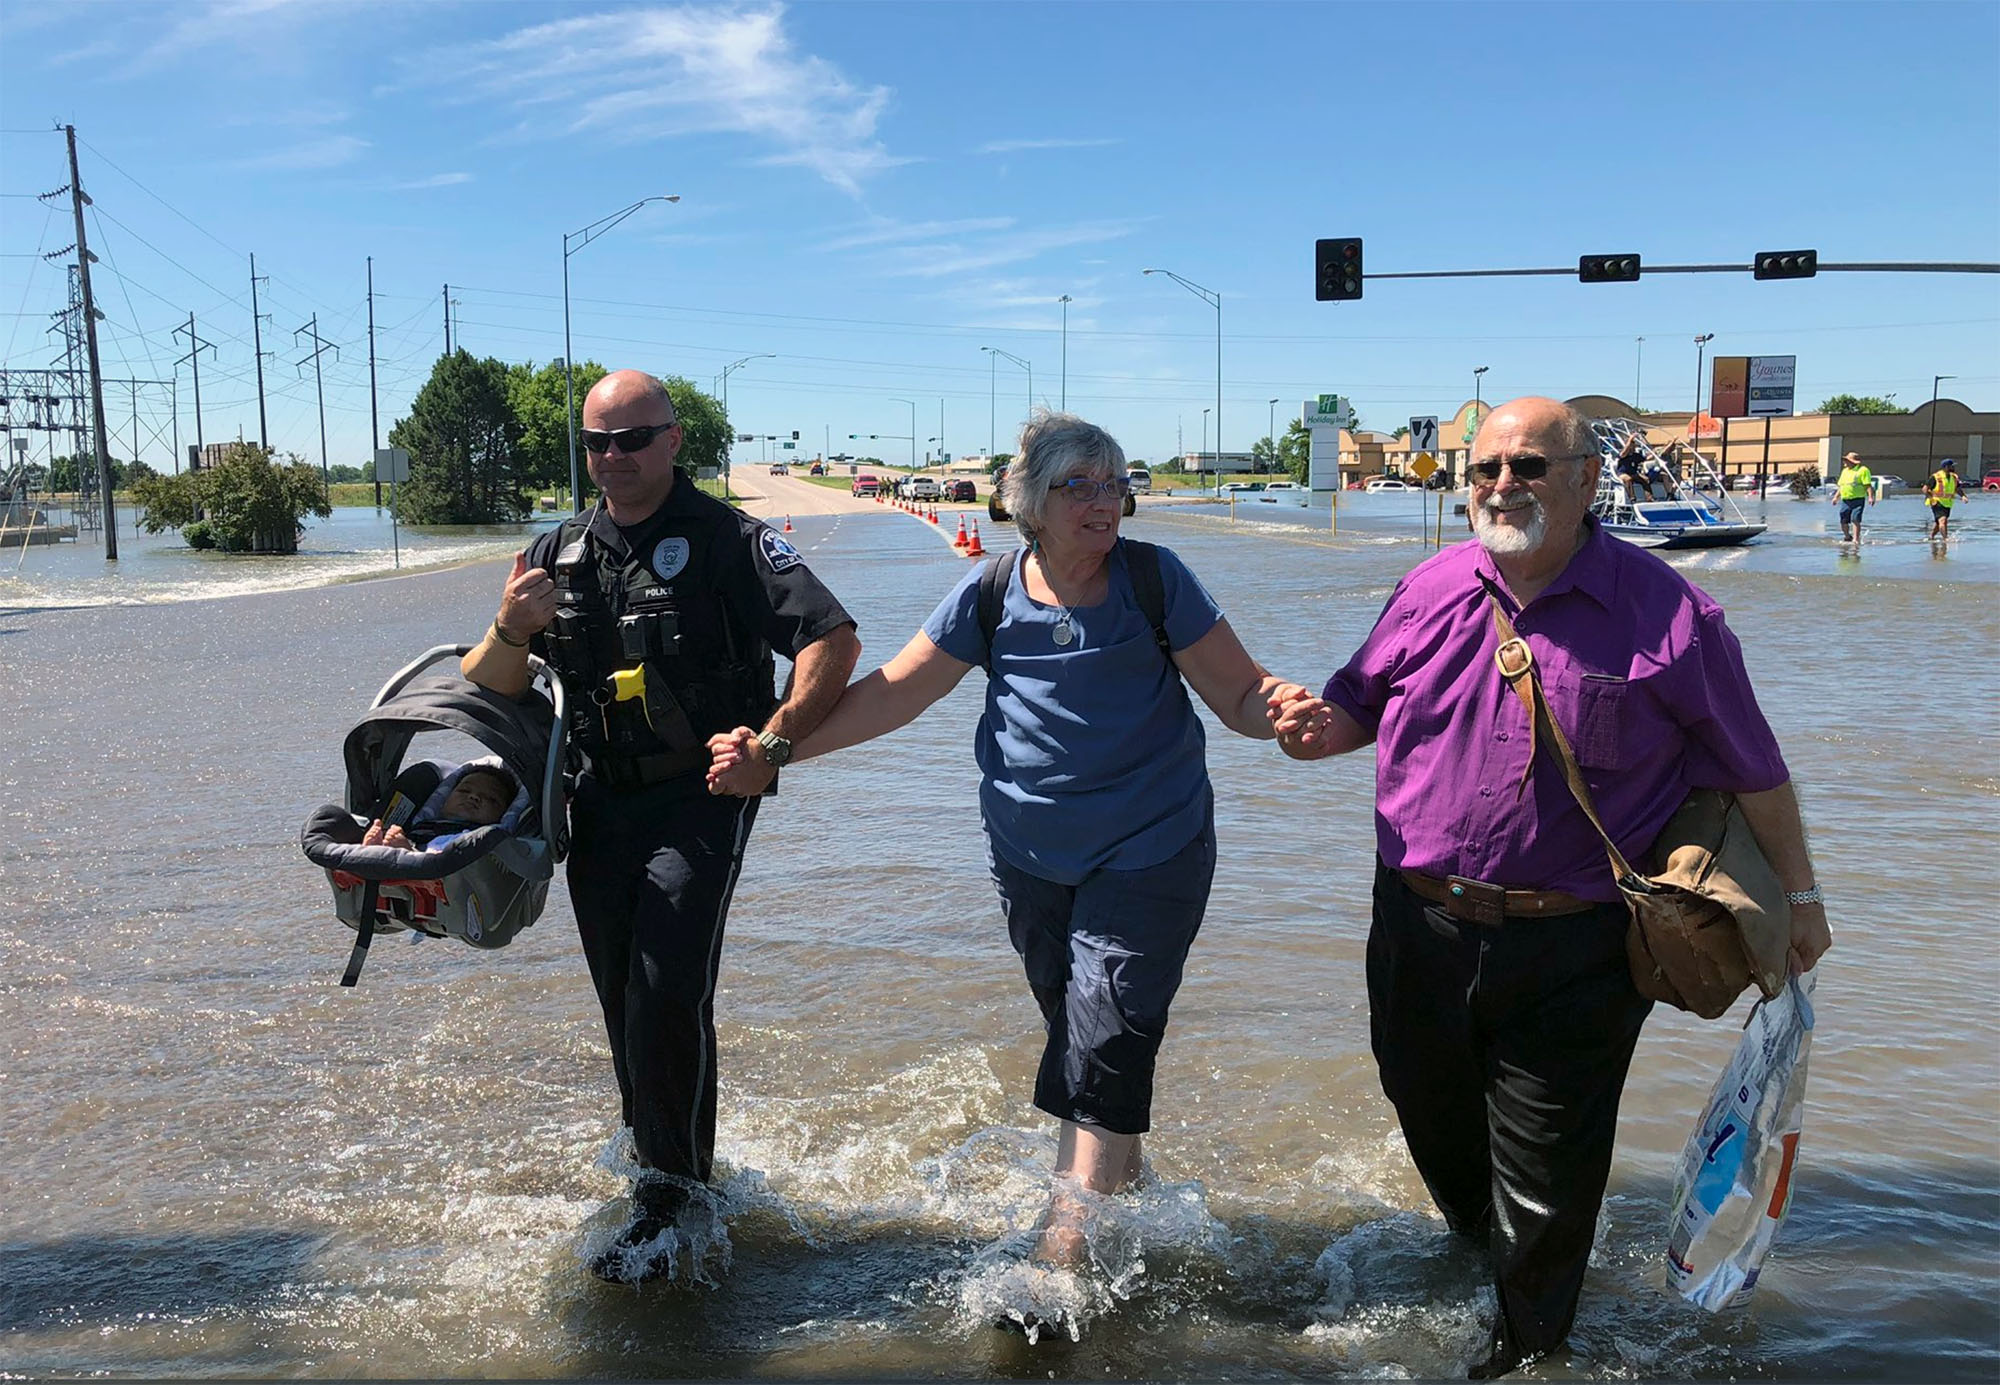 Kearney Police Officer Derek Payton assists Leslye and Terry Taylor of Pueblo, Colorado, and their 3-month-old grandson as they walk through the floodwater Tuesday after evacuating a local hotel. (Photo courtesy of Kearney Police Department)